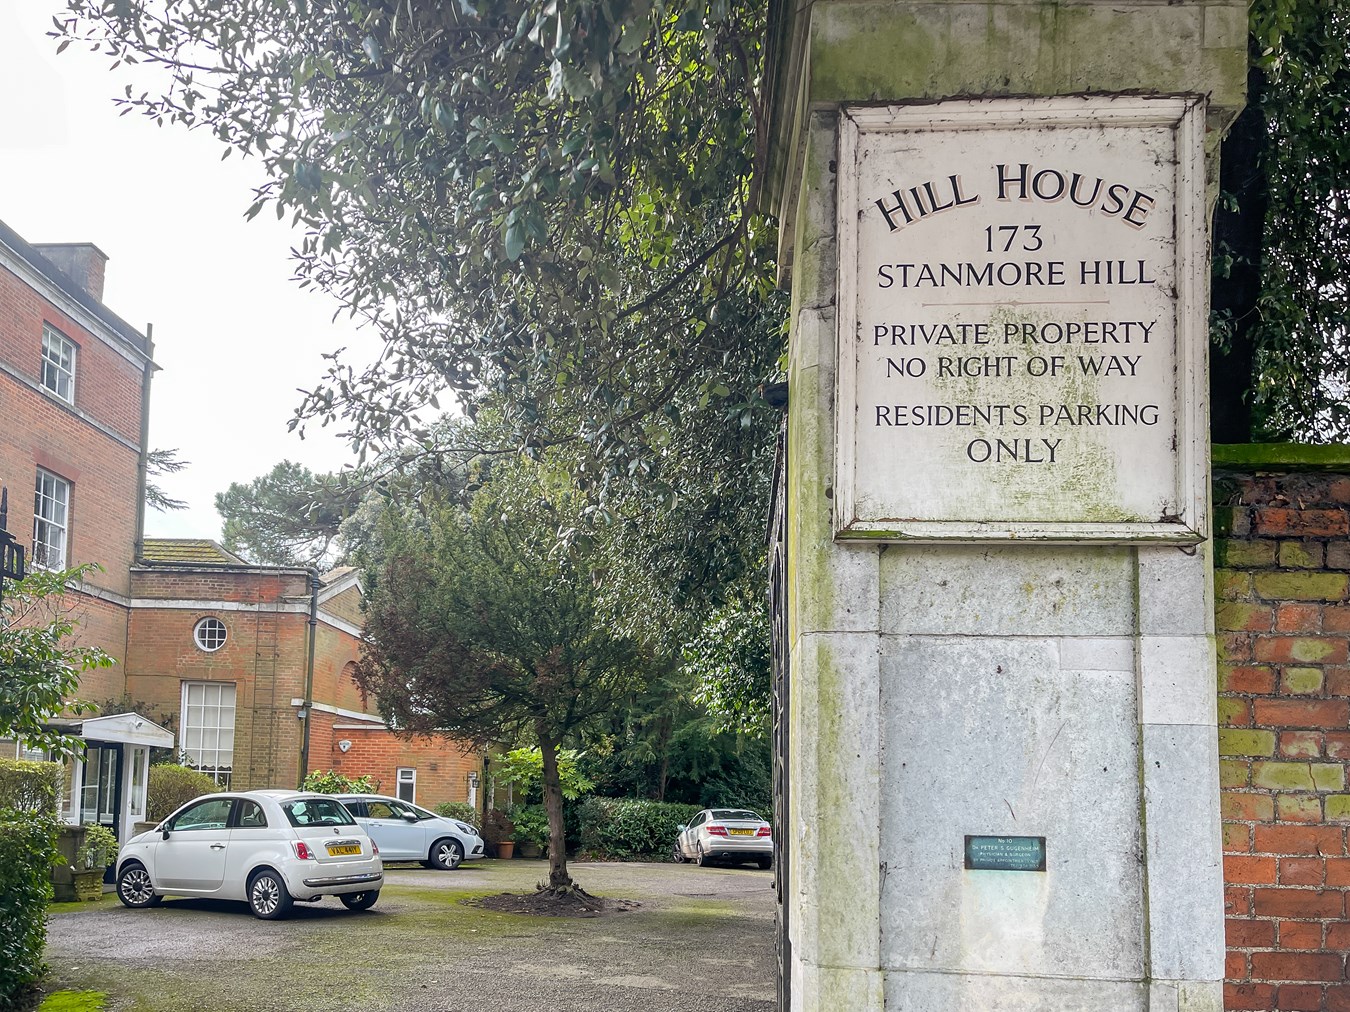 Hill House, 173 Stanmore Hill, Stanmore, HA7